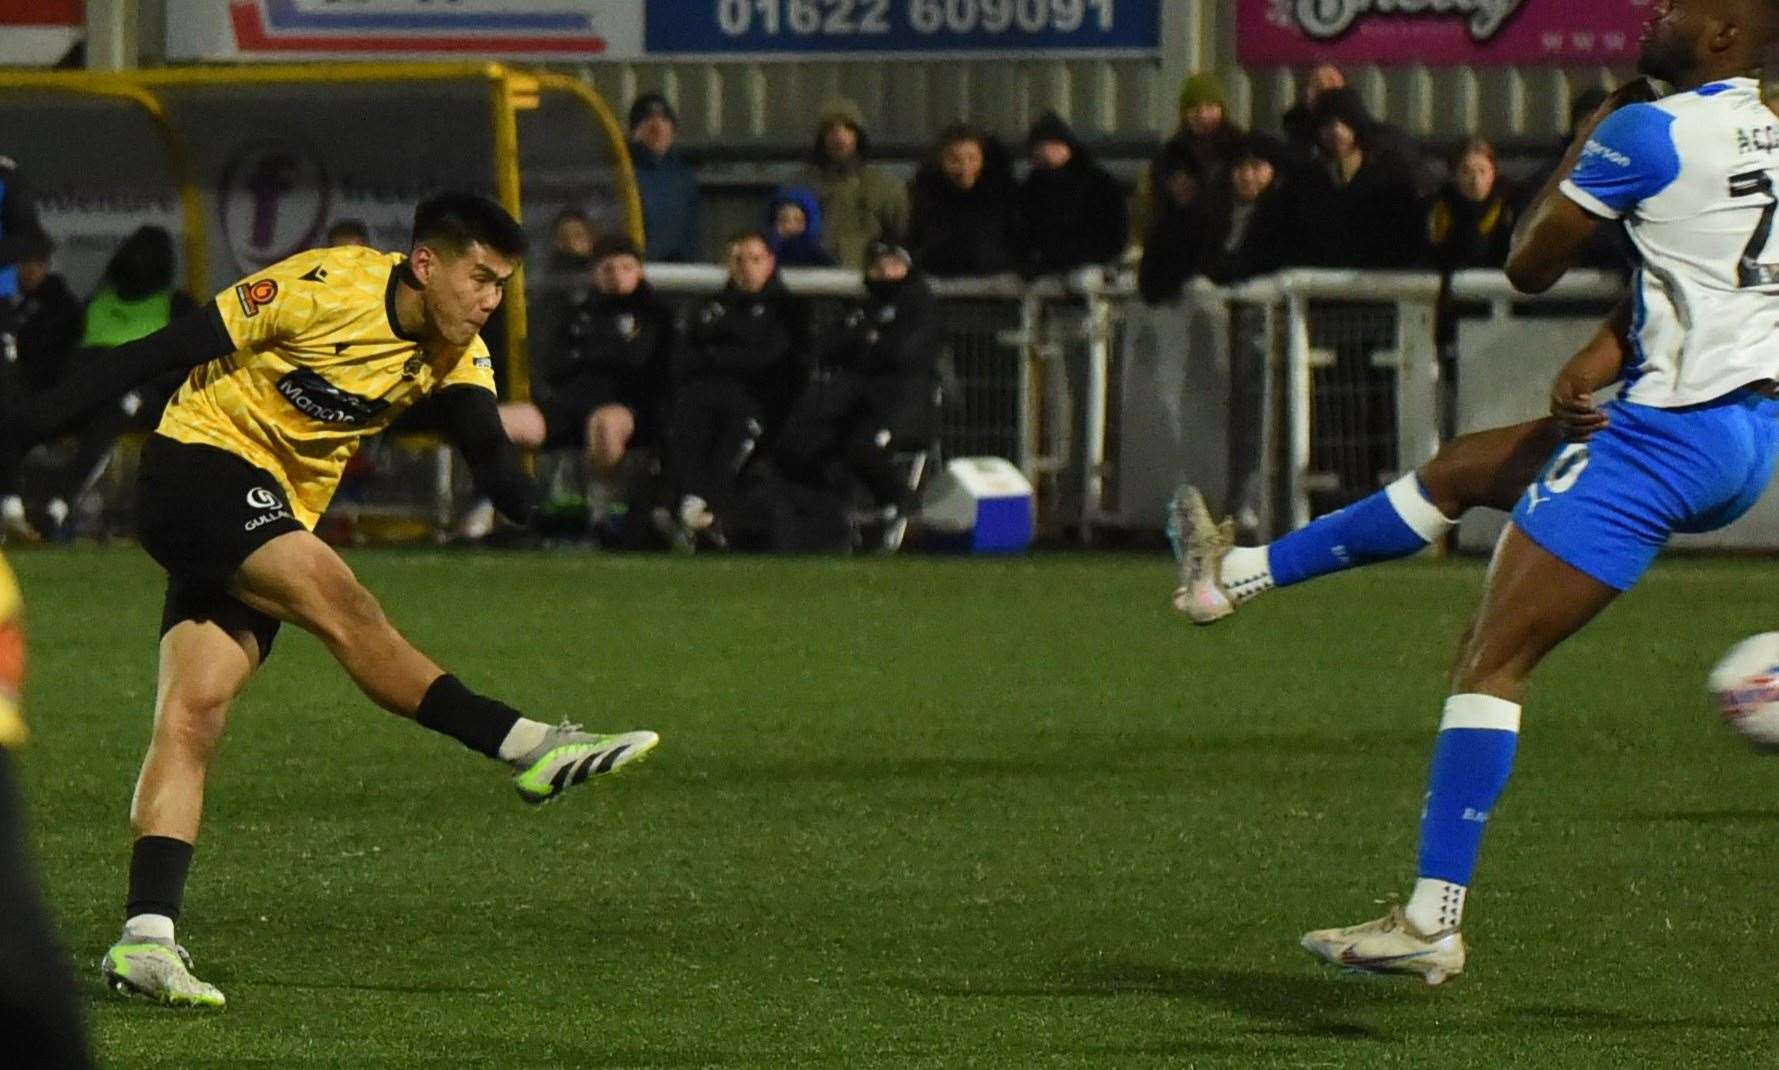 Maidstone midfielder Bivesh Gurung scores the winner - and goal of the round - against Barrow in the FA Cup. Picture: Steve Terrell